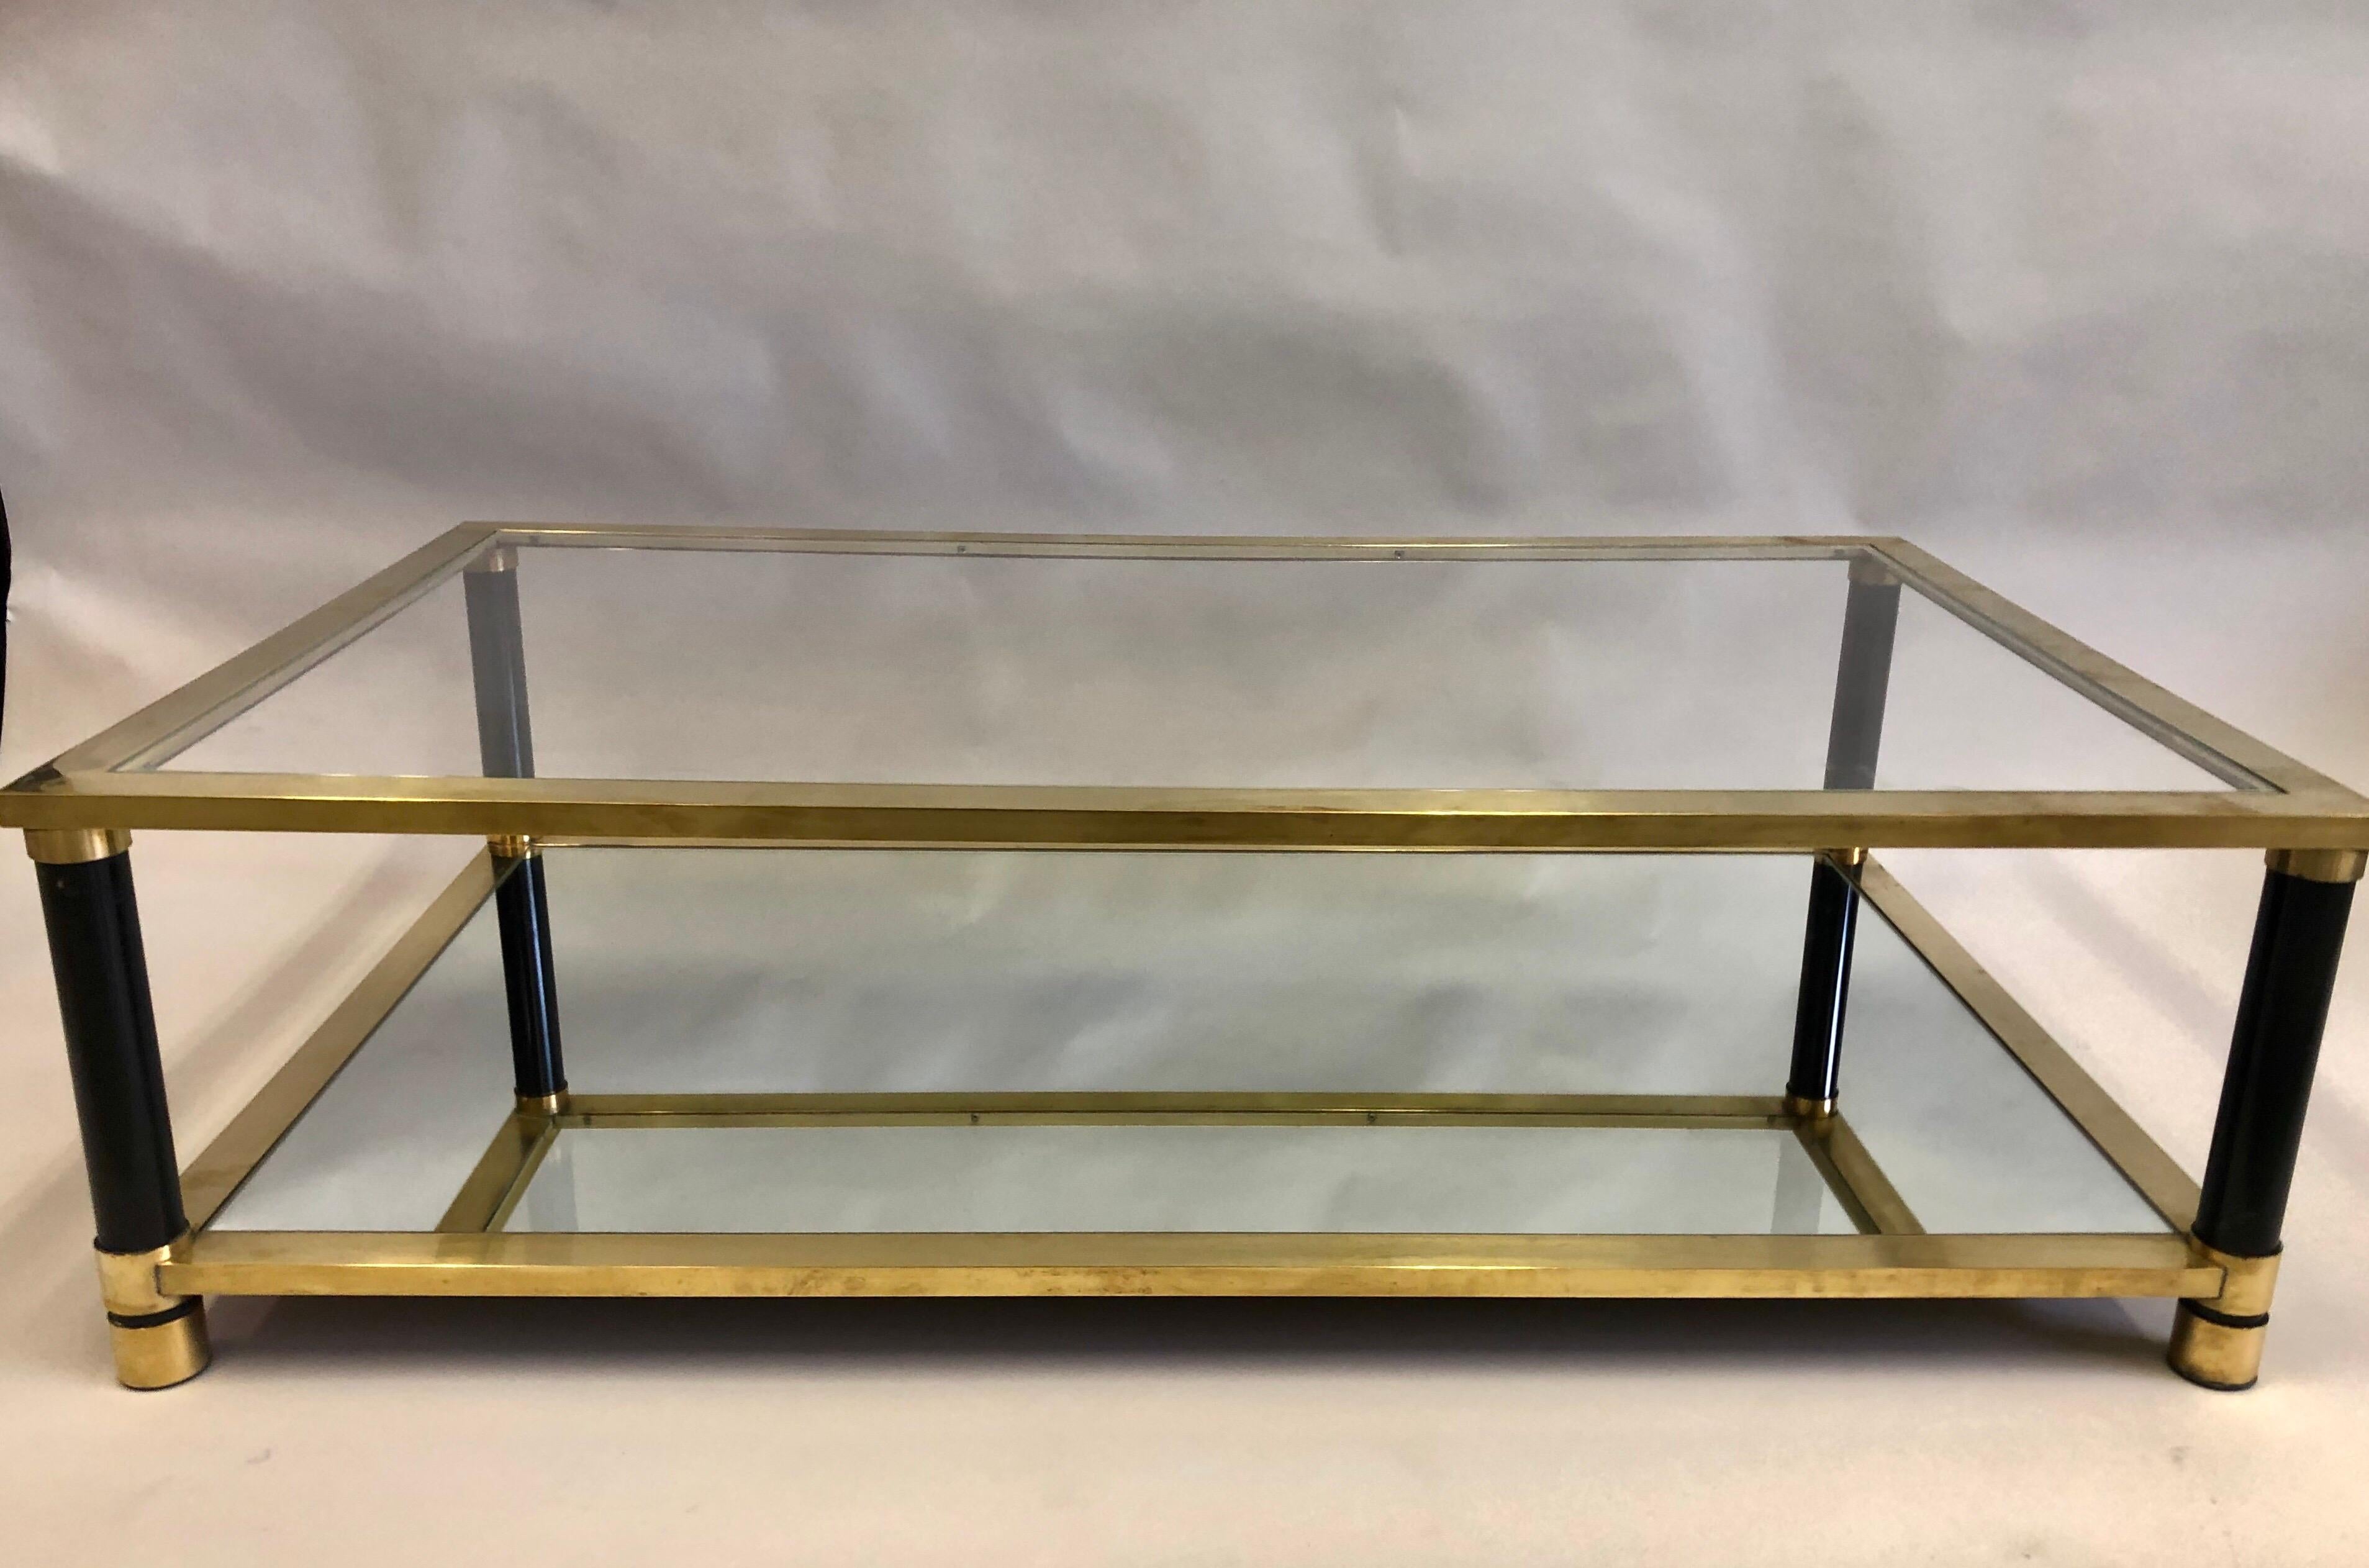 Large French Mid-Century Modern Double Level Brass Coffee Table, Maison Charles (Französisch)